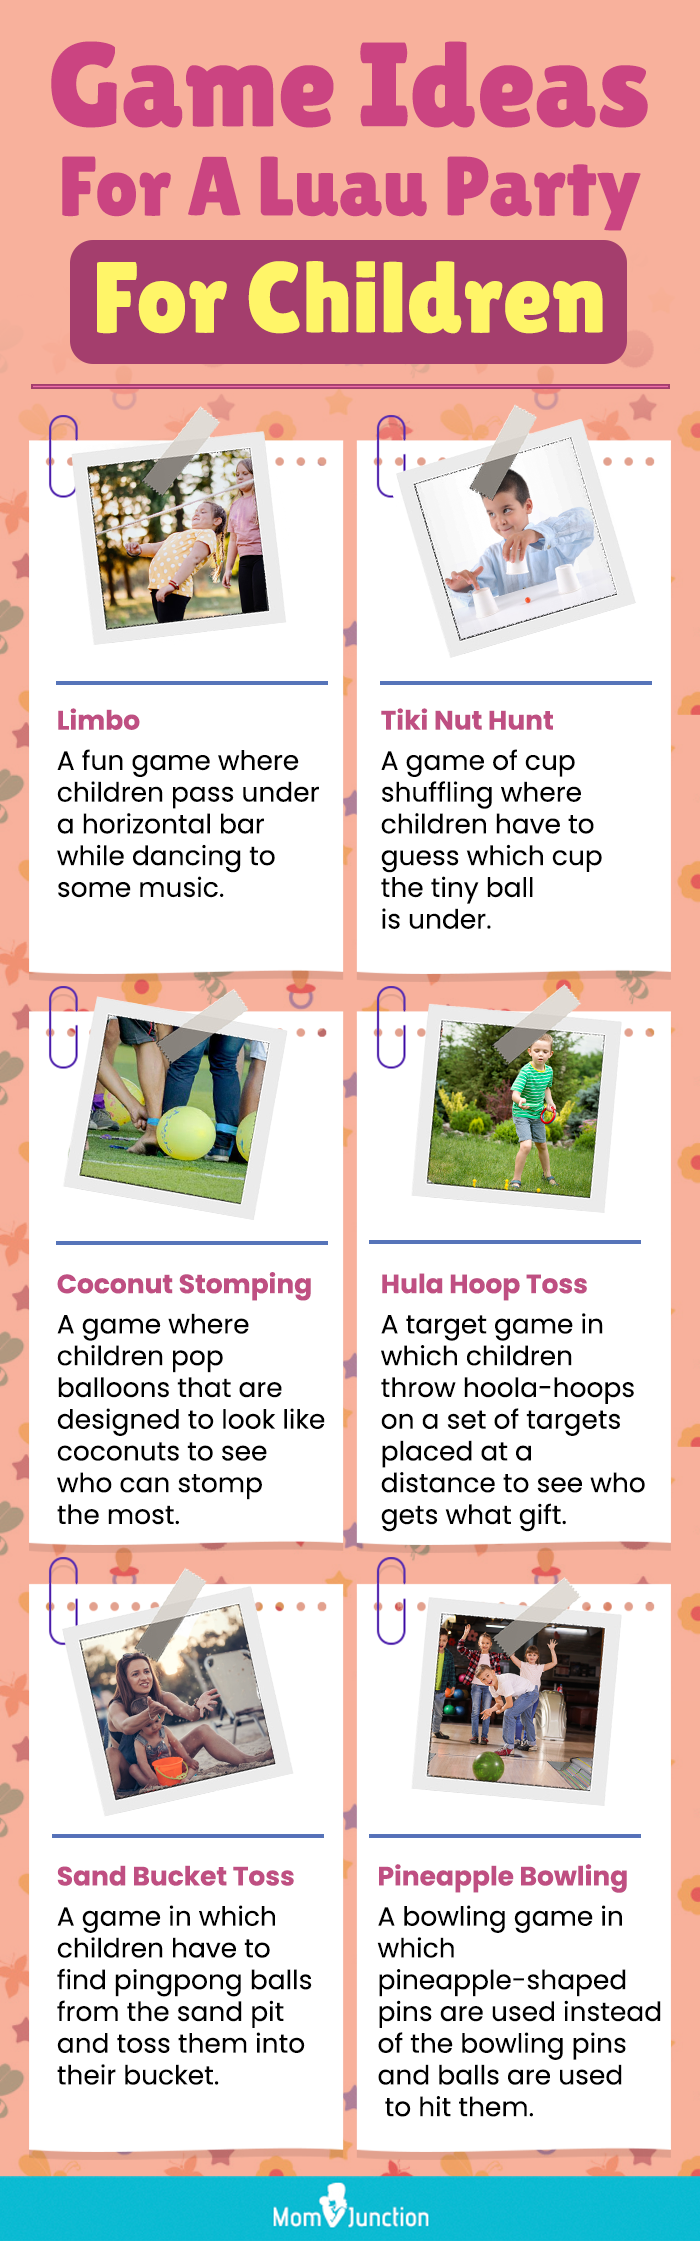 game ideas for a luau (Infographic)